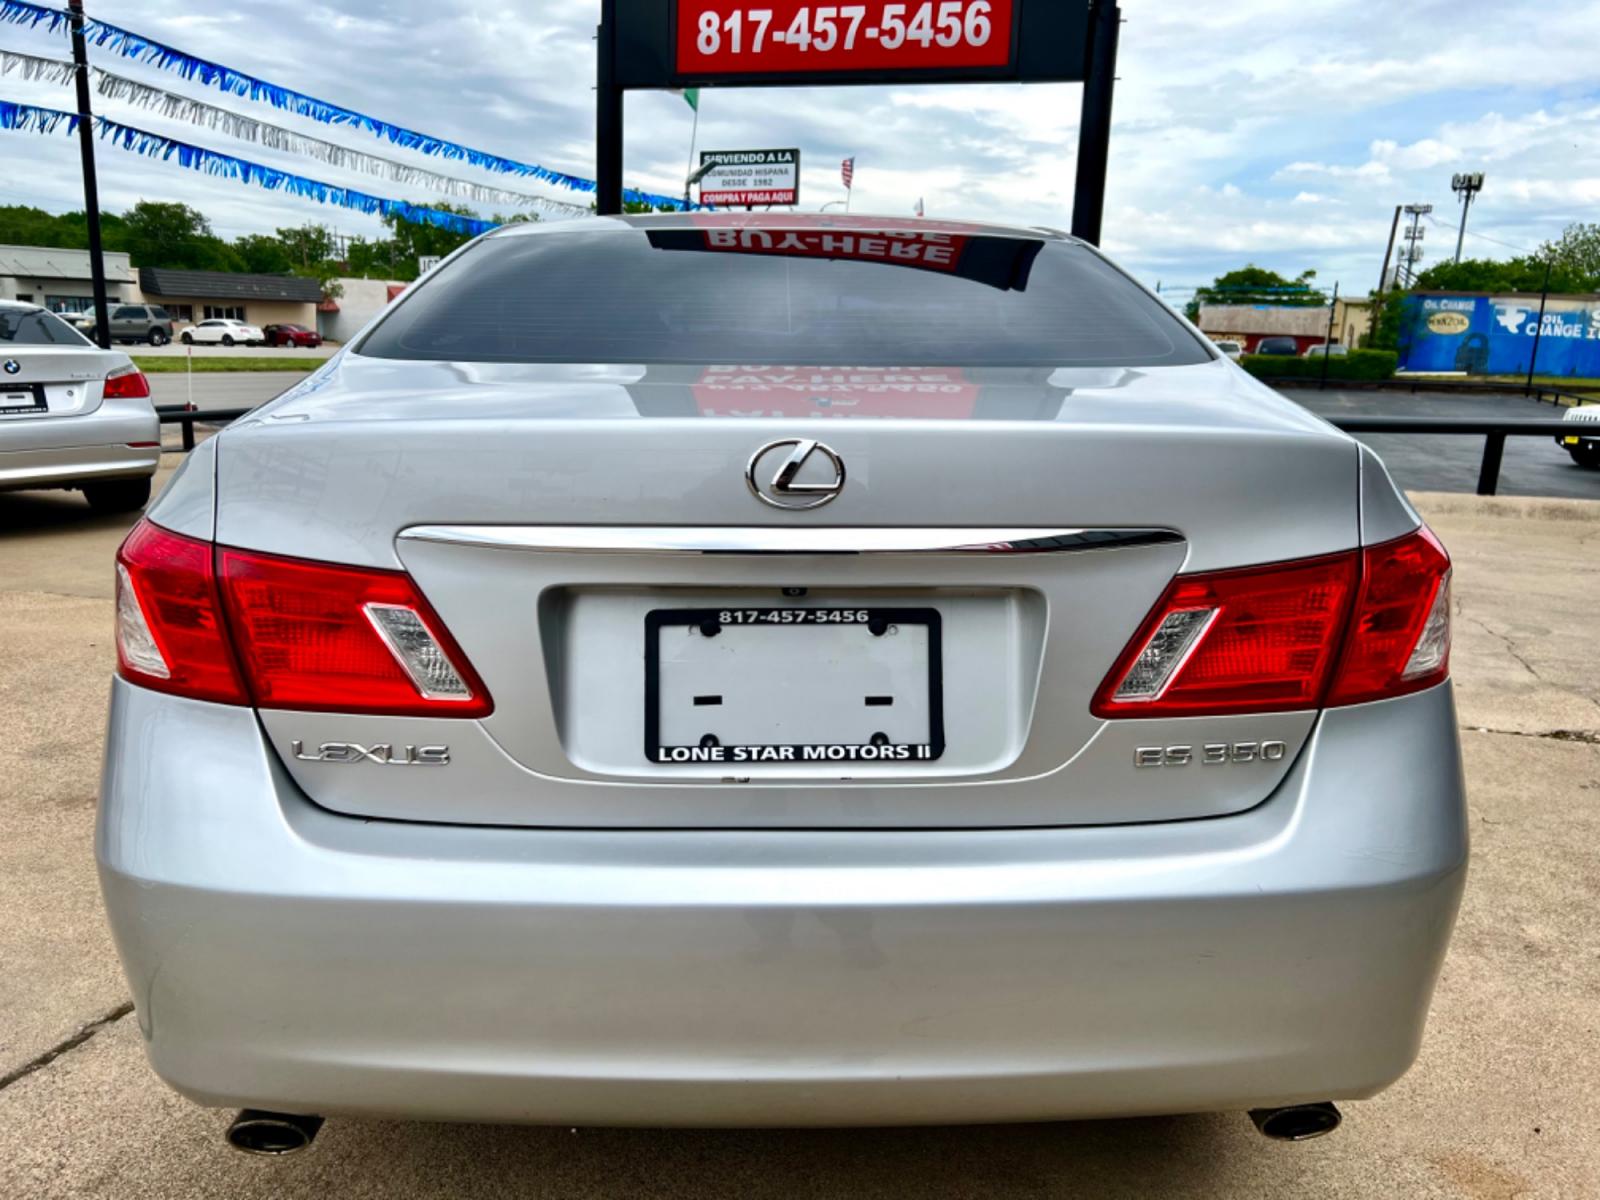 2007 SILVER LEXUS ES 350 BASE (JTHBJ46G072) , located at 5900 E. Lancaster Ave., Fort Worth, TX, 76112, (817) 457-5456, 0.000000, 0.000000 - CASH CAR ONLY, NO FINANCING AVAILABLE. THIS 2007 LEXUS ES 350 BASE 4 DOOR SEDAN RUNS AND DRIVES GREAT. IT IS EQUIPPED WITH A CD PLAYER, AM/FM RADIO AND AN AUX PORT. THE TIRES ARE IN GOOD CONDITION AND STILL HAVE TREAD LEFT ON THEM. THIS CAR WILL NOT LAST SO ACT FAST! Call or text Frances at 68 - Photo #5